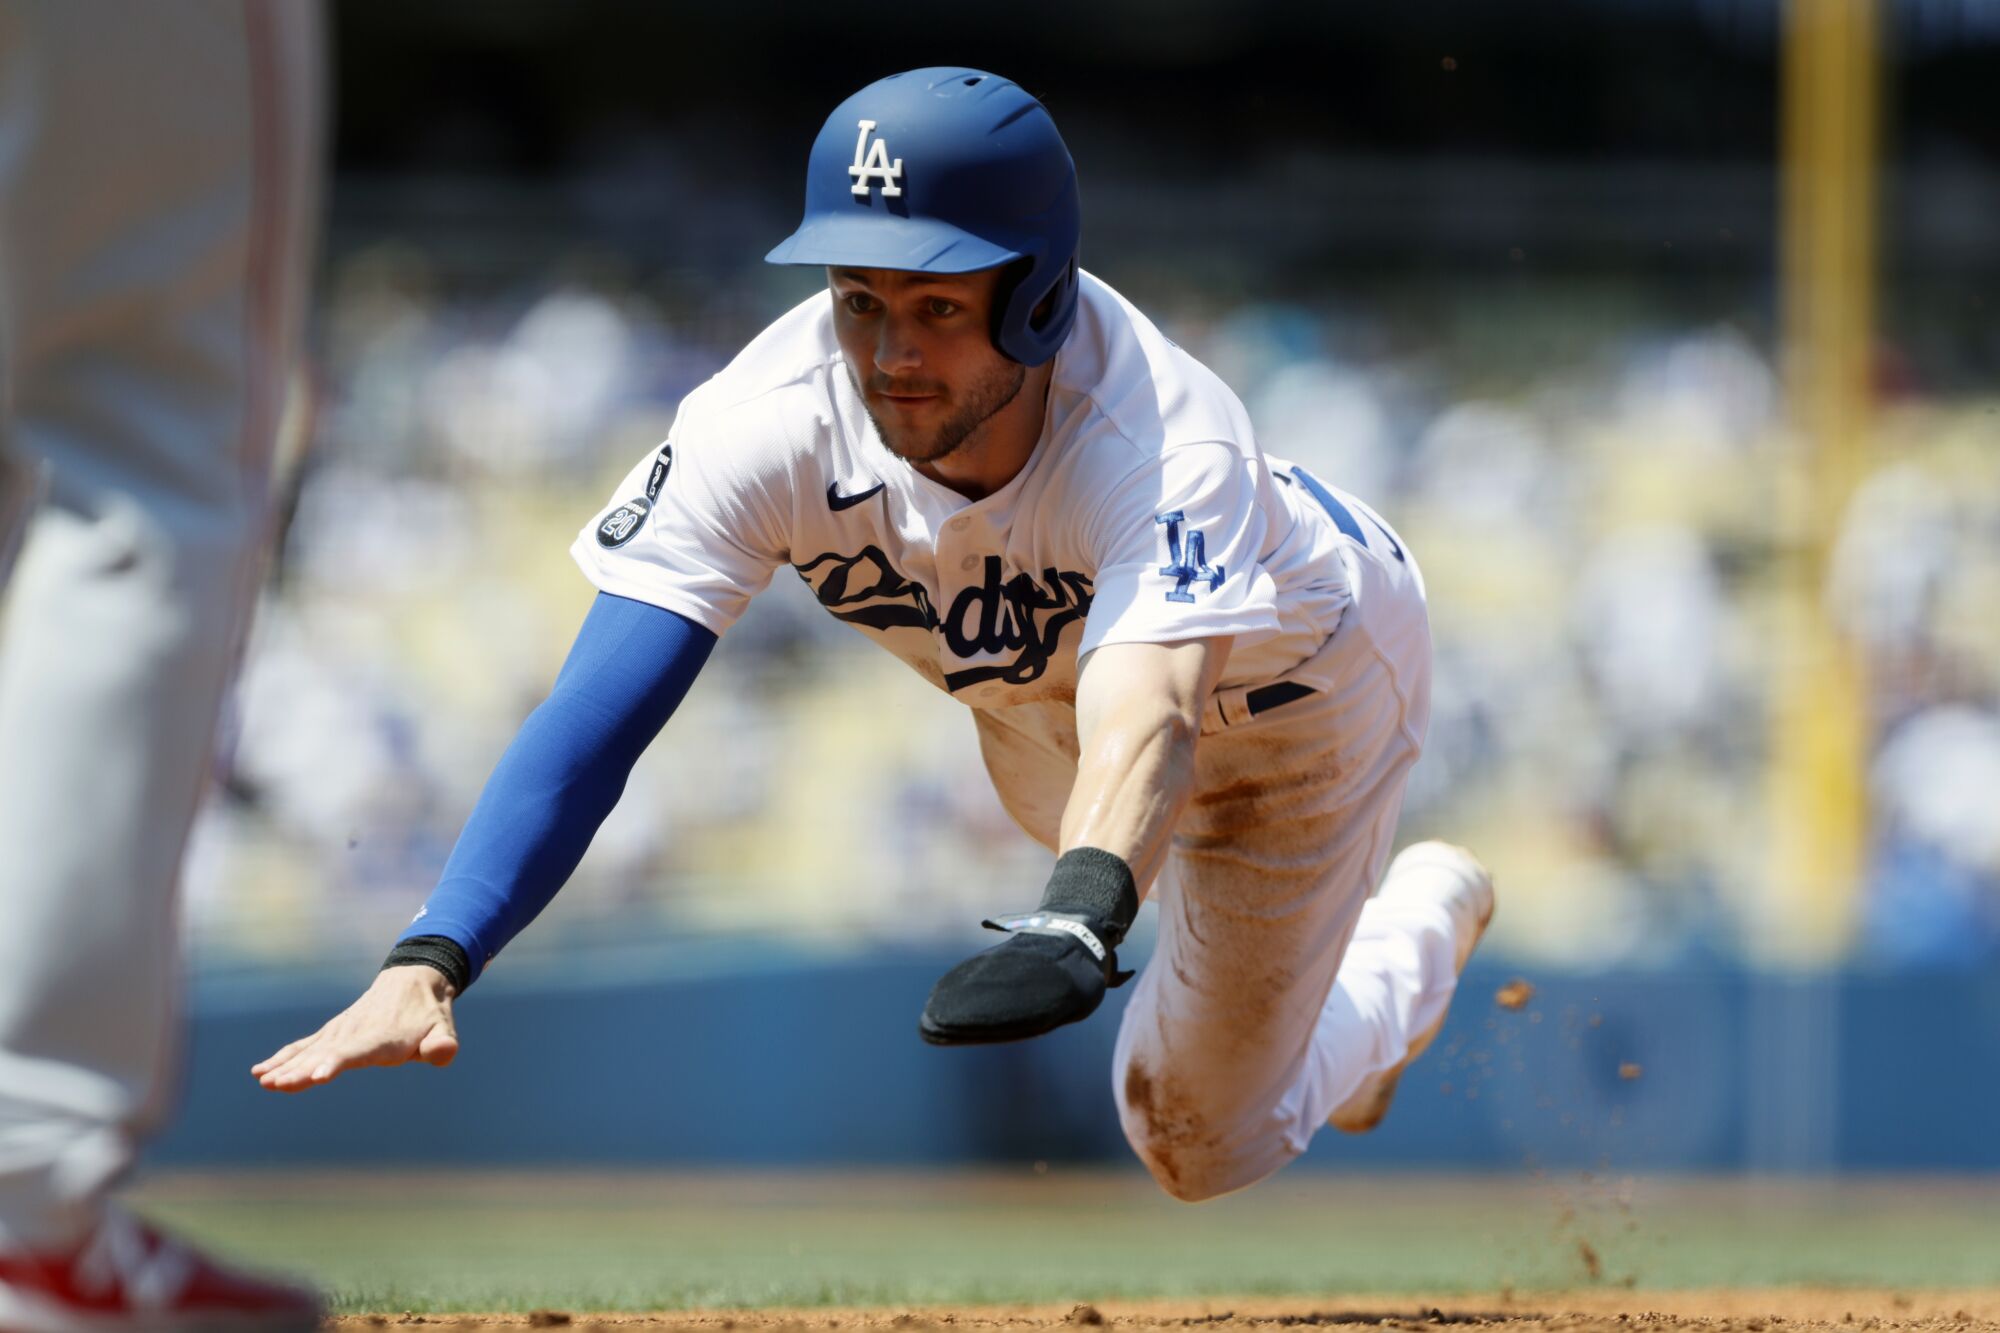 Dodgers' Trea Turner dives back to first base to tag up on a fly ball hit by Max Muncy.